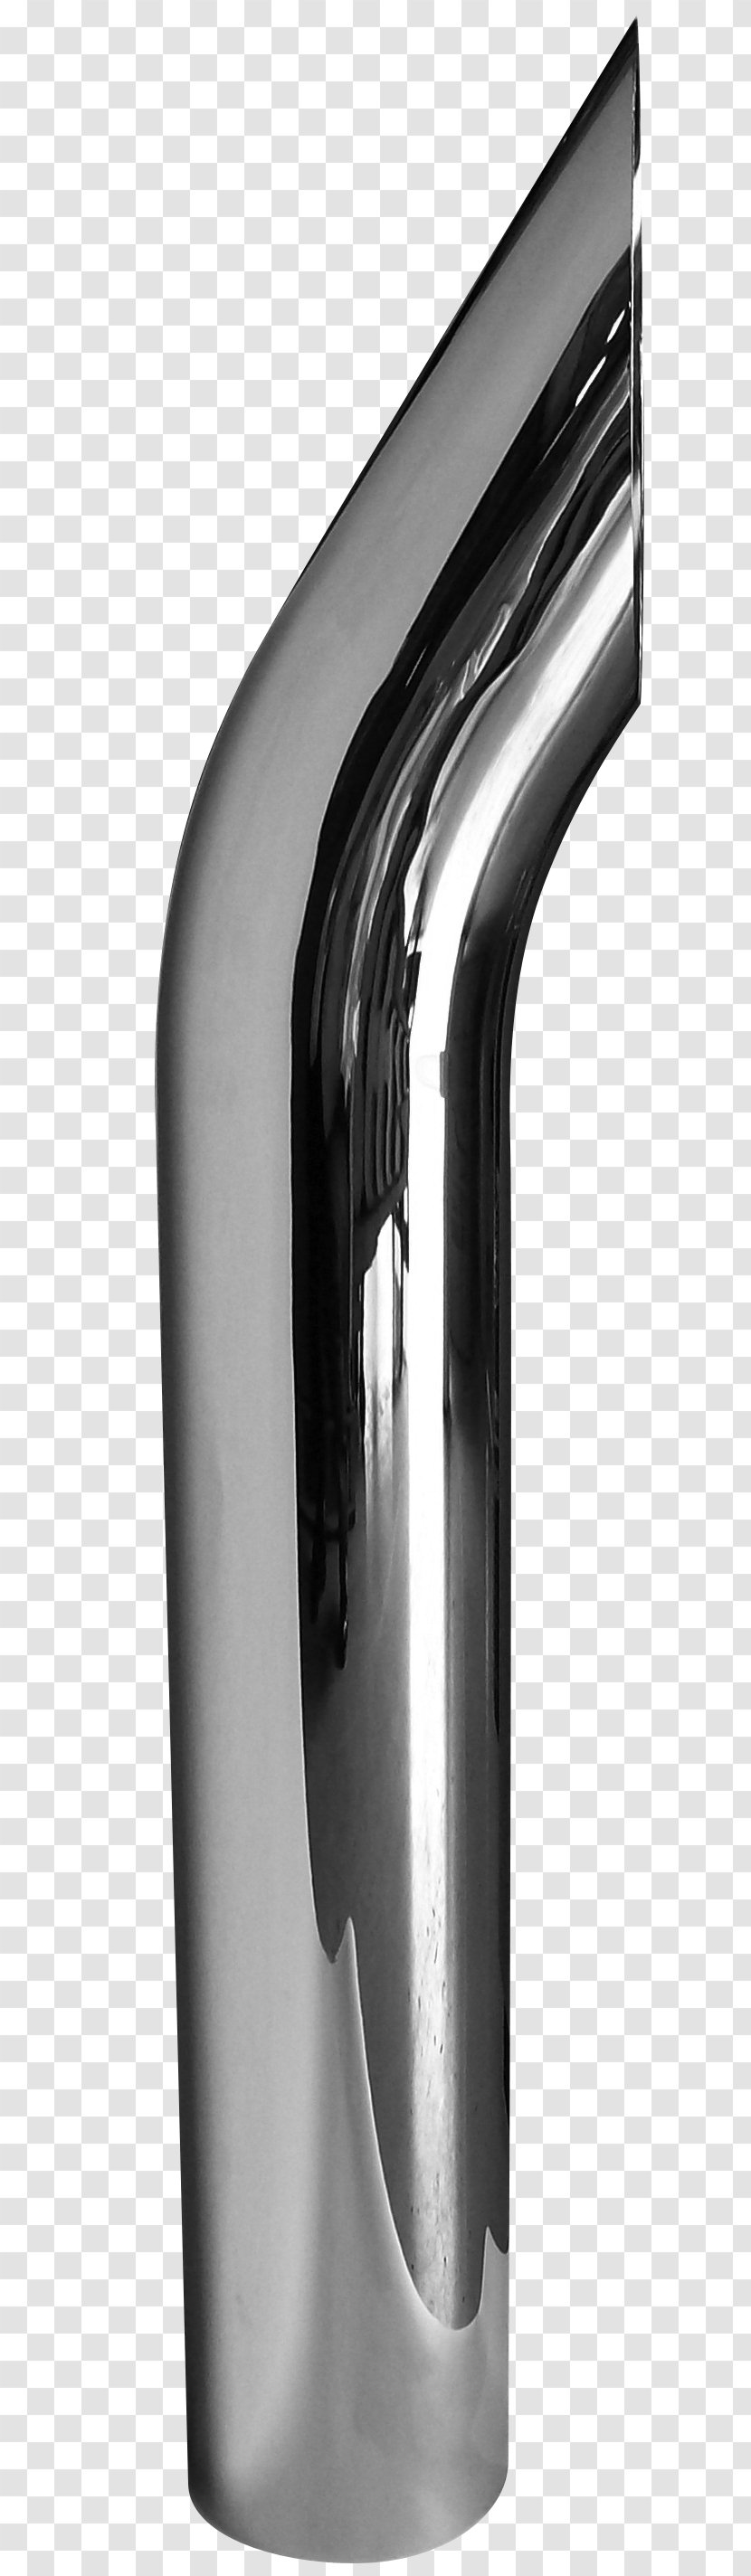 Exhaust System Chrome Plating Truck Muffler Pipe - Flower Transparent PNG